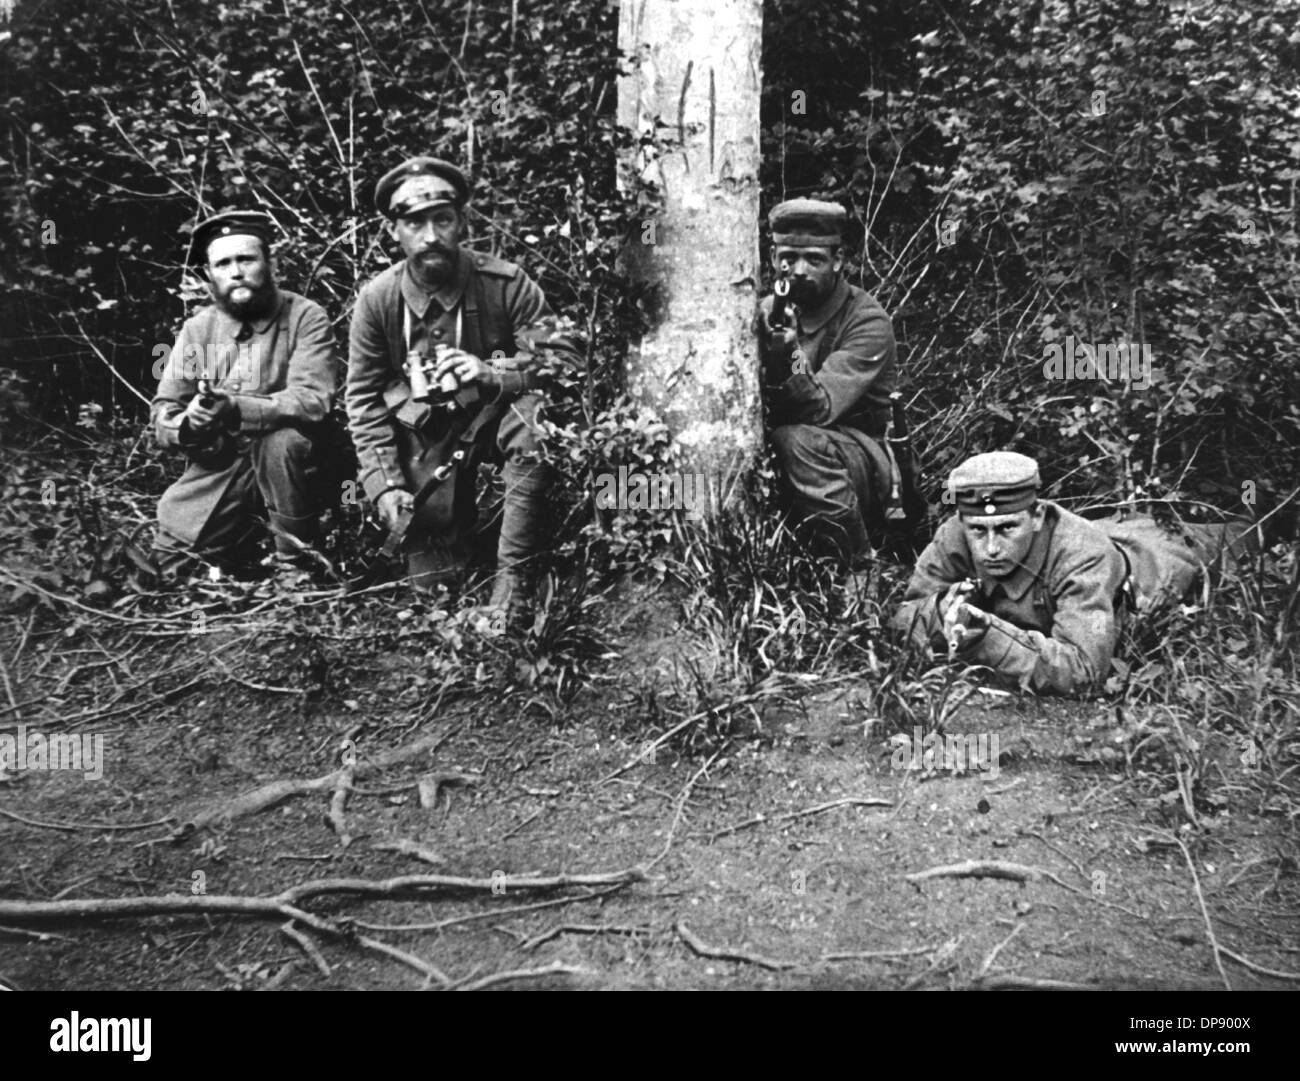 German soldiers at the Western front in 1915. Set off by the deadly shots on Austrian heir to the throne Franz Ferdinand by Serbian nationalists on the 28th of June in 1914 in Sarajevo, World War I broke out. During World War I, Germany, Austria, Austria-Hungary as well as later Turkey and Bulgary fought against Britain, France and Russia. The sad end result in 1918 comprised roughly 8.5 million soldiers killed in action, more than 21 million wounded and almost 8 million prisoners of war and missing people. Stock Photo